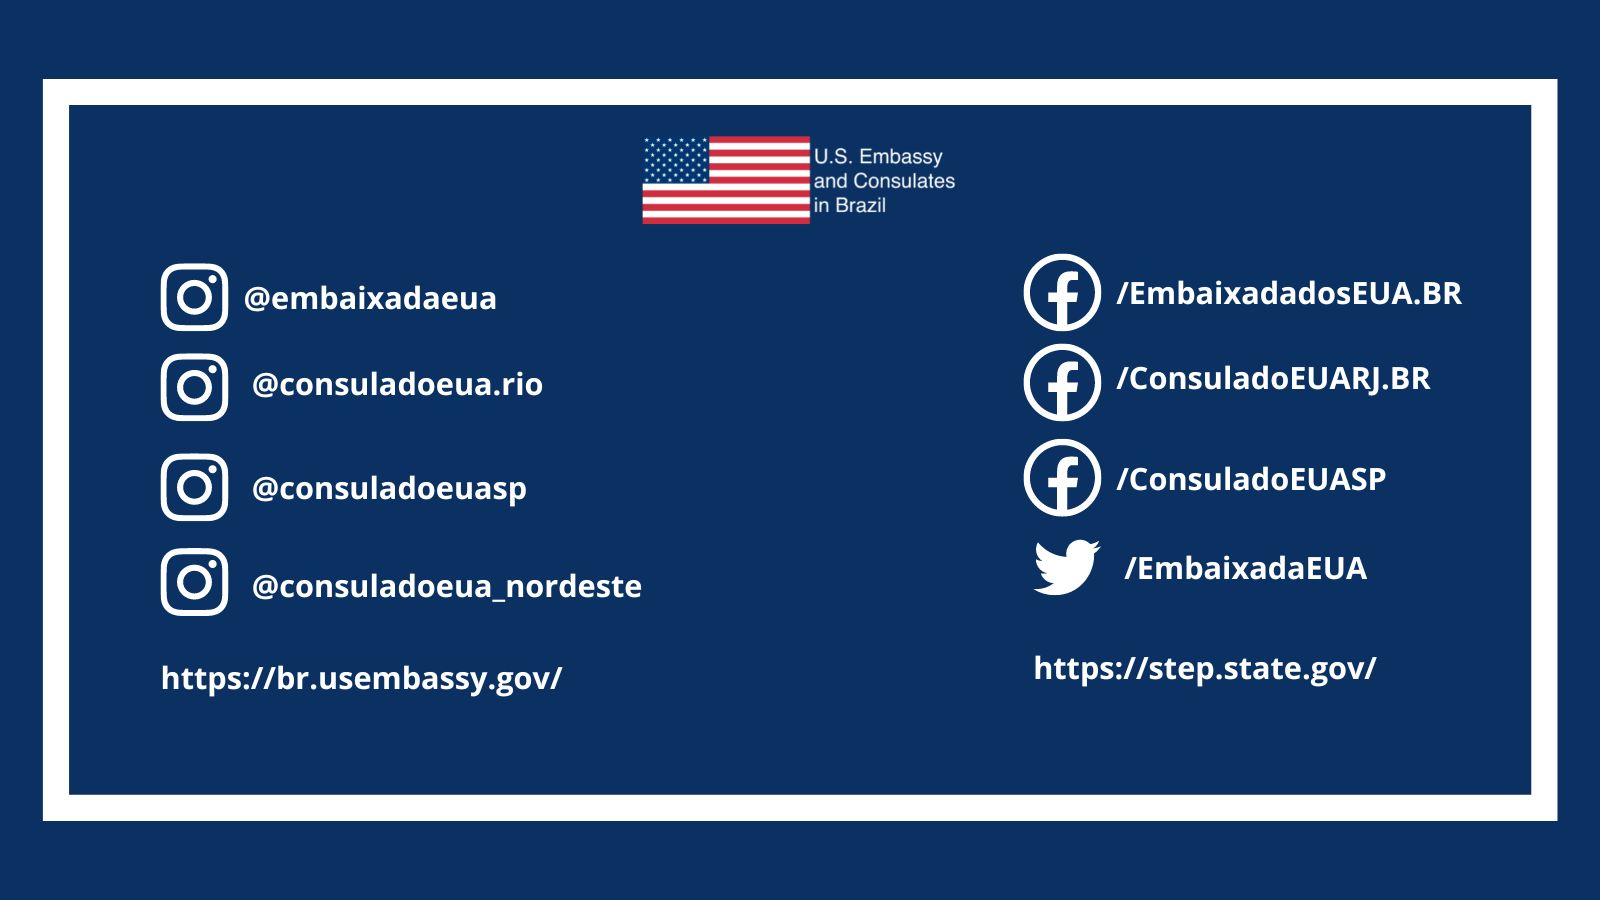 Contact Information and Working Hours - U.S. Embassy & Consulates in Brazil